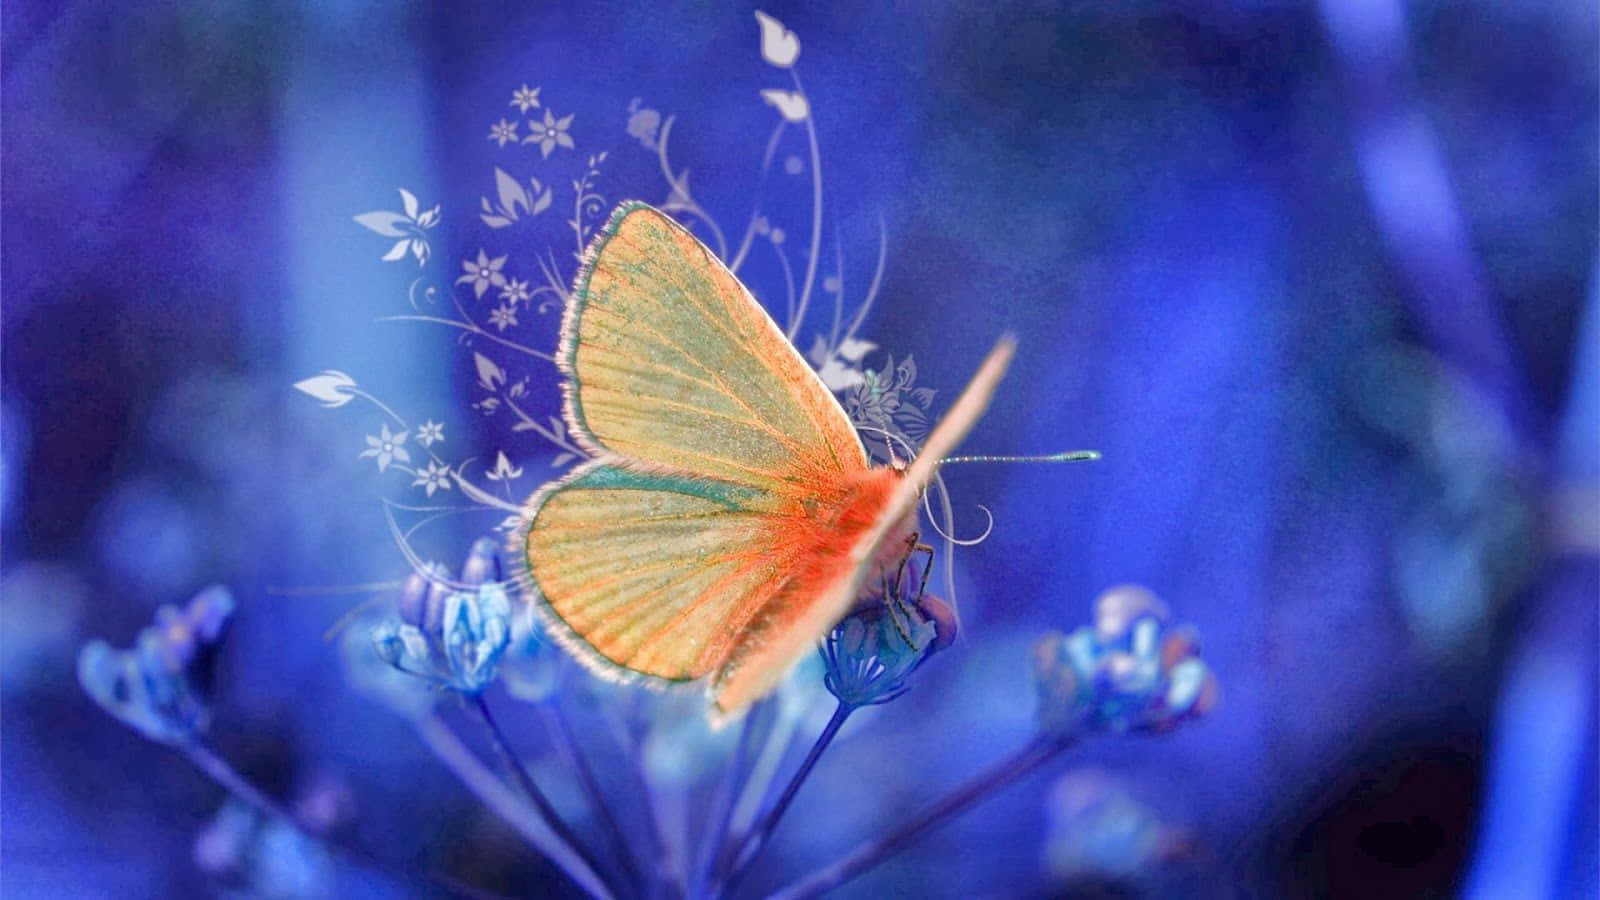 Vibrant Yellow Butterfly Perched on Flower Wallpaper